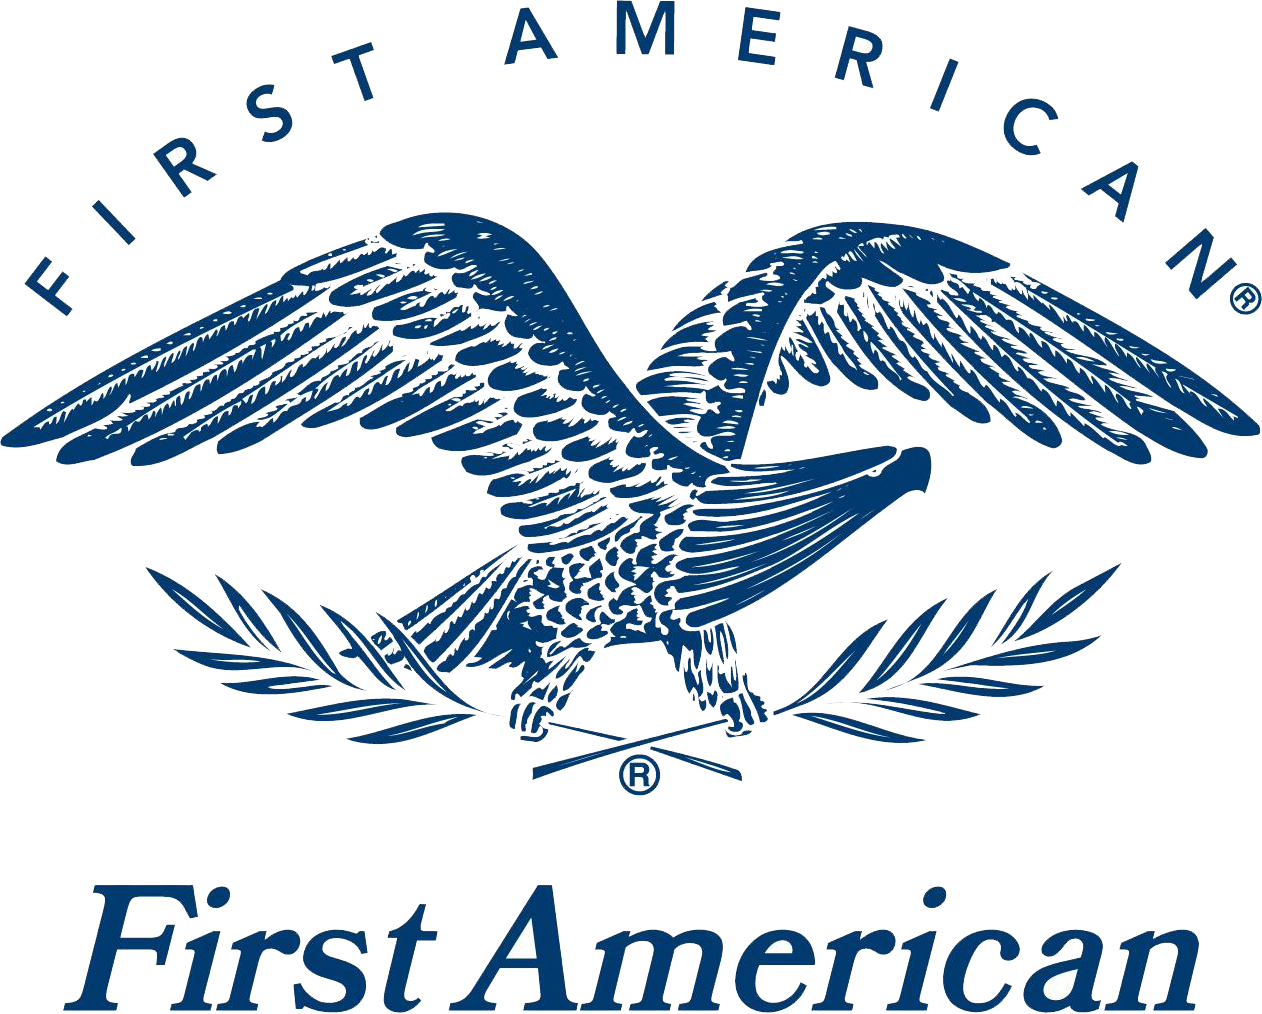 Logo for First American Title